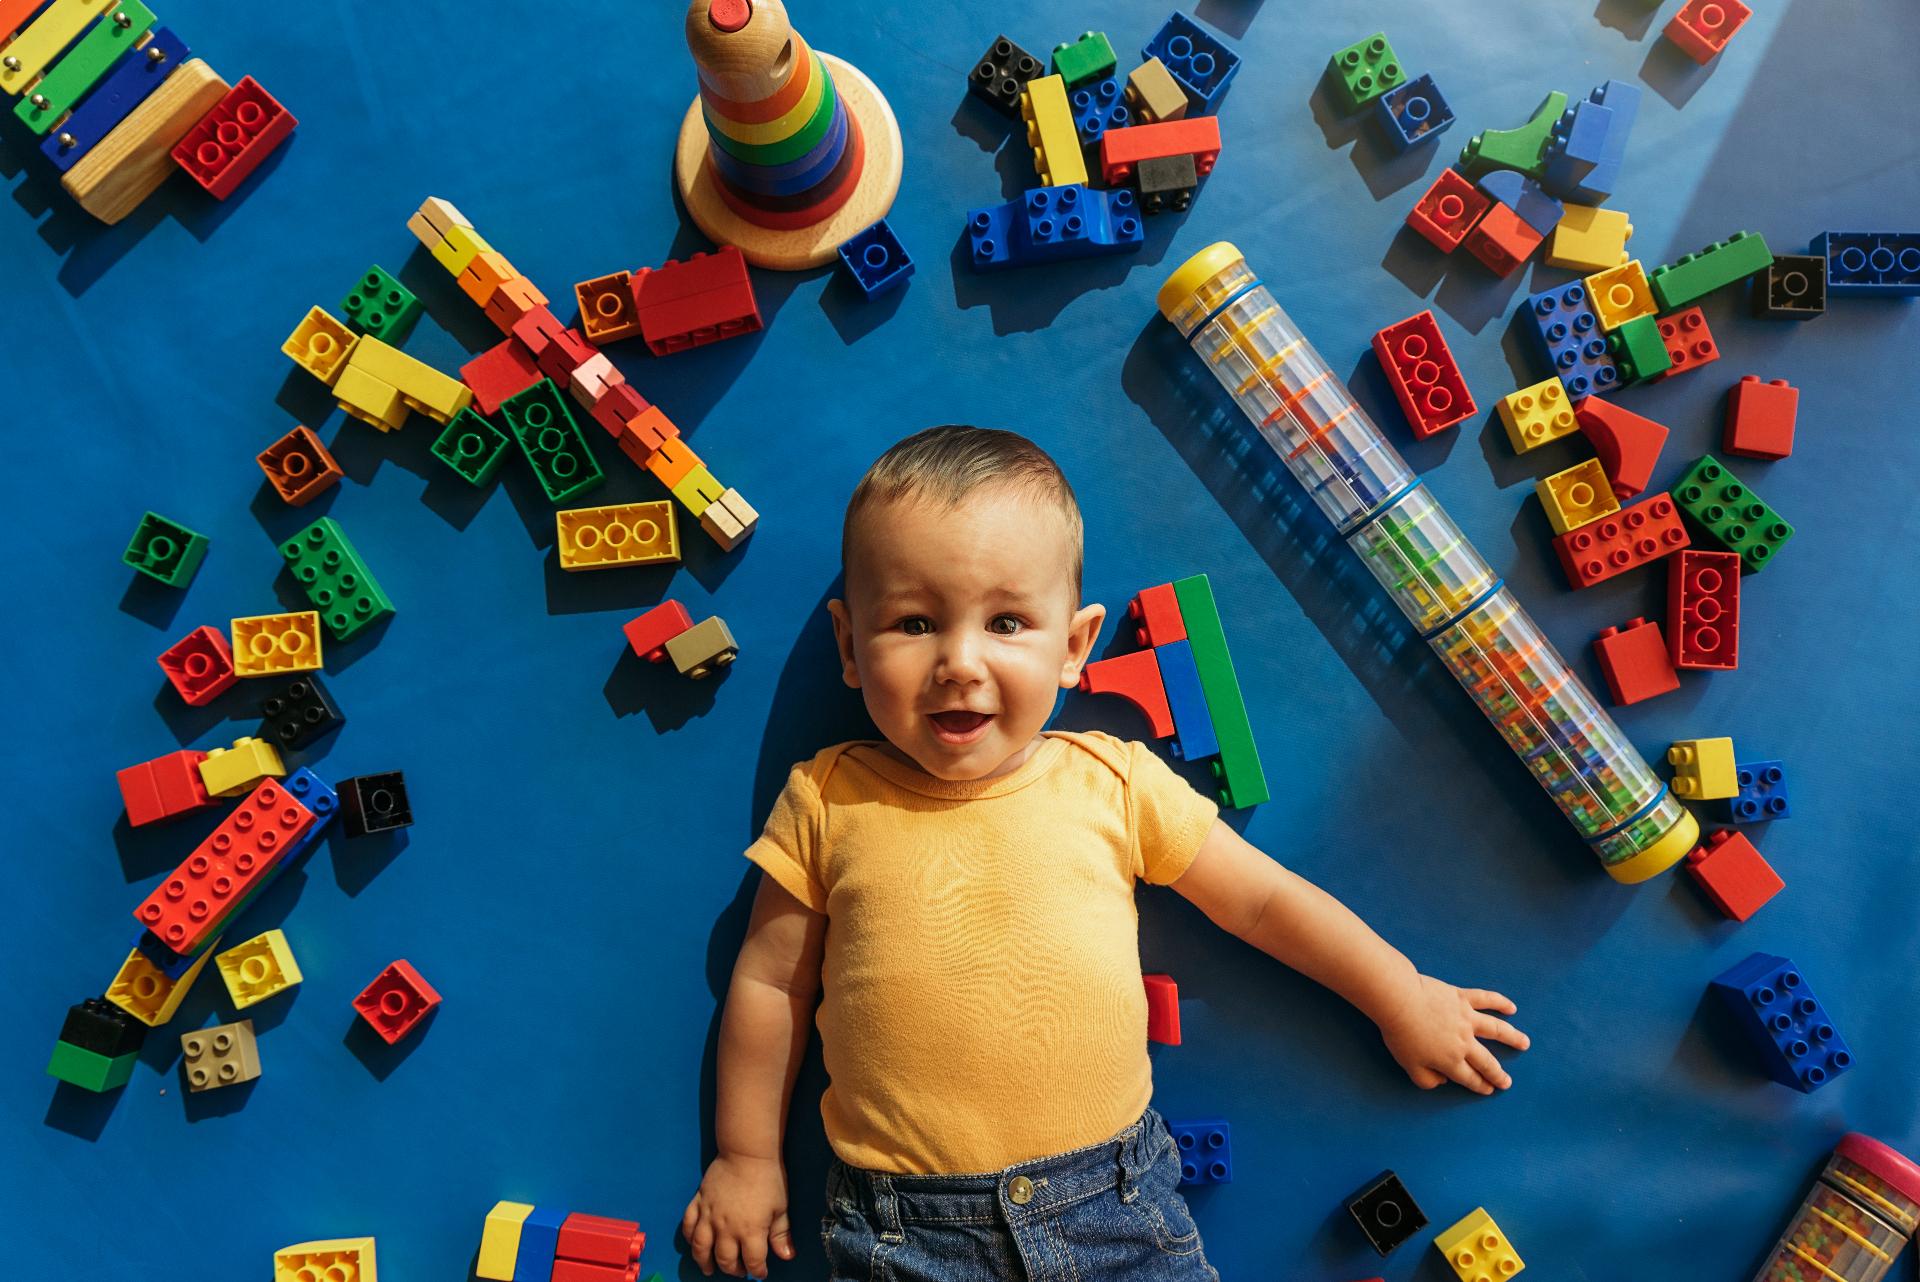 Consolidation resumes in the UK’s childcare sector